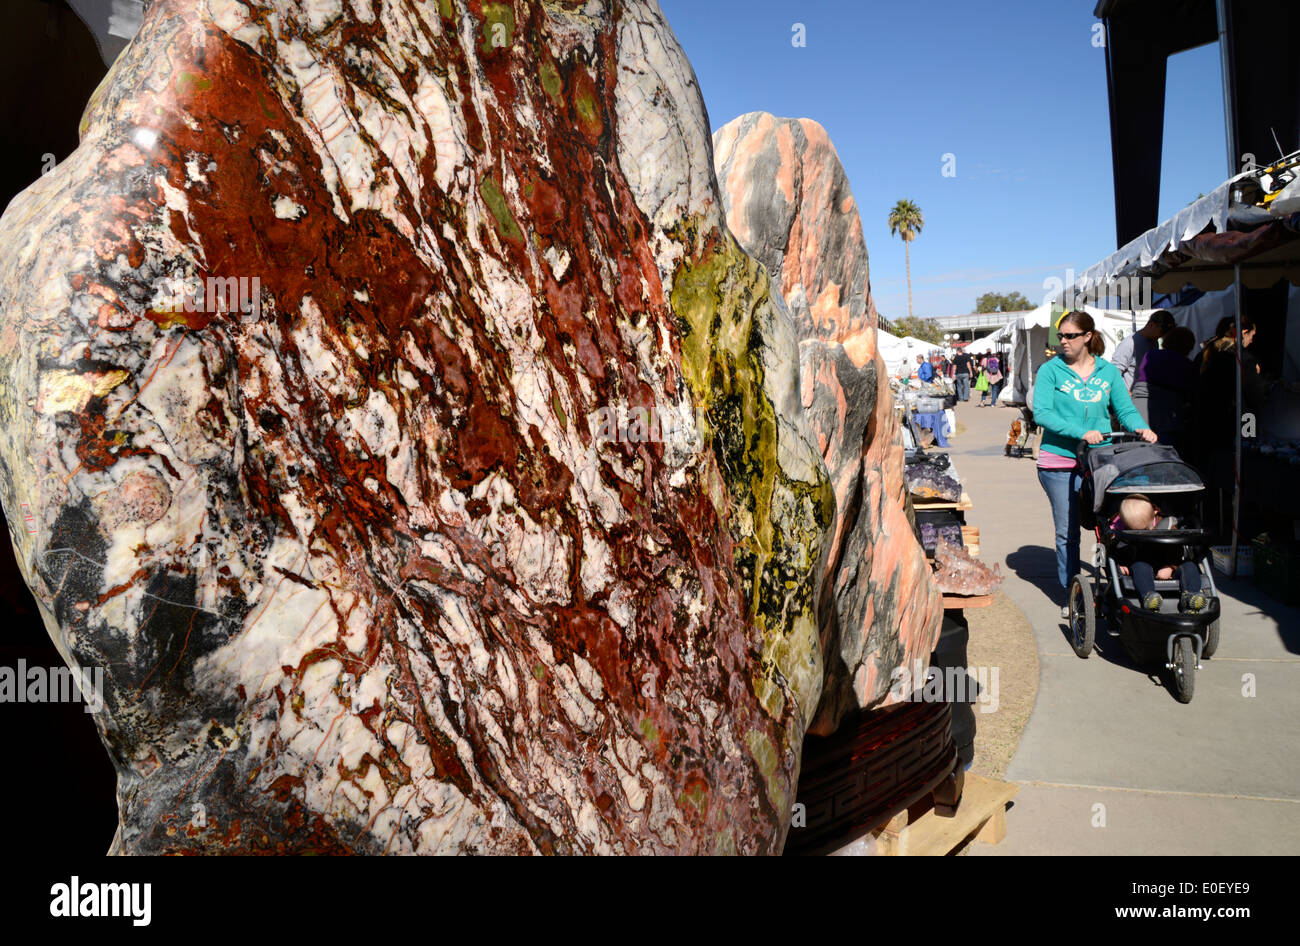 The annual Tucson Gem and Mineral Show draws vendors and buyers from around the world in Tucson, Arizona, USA. Stock Photo